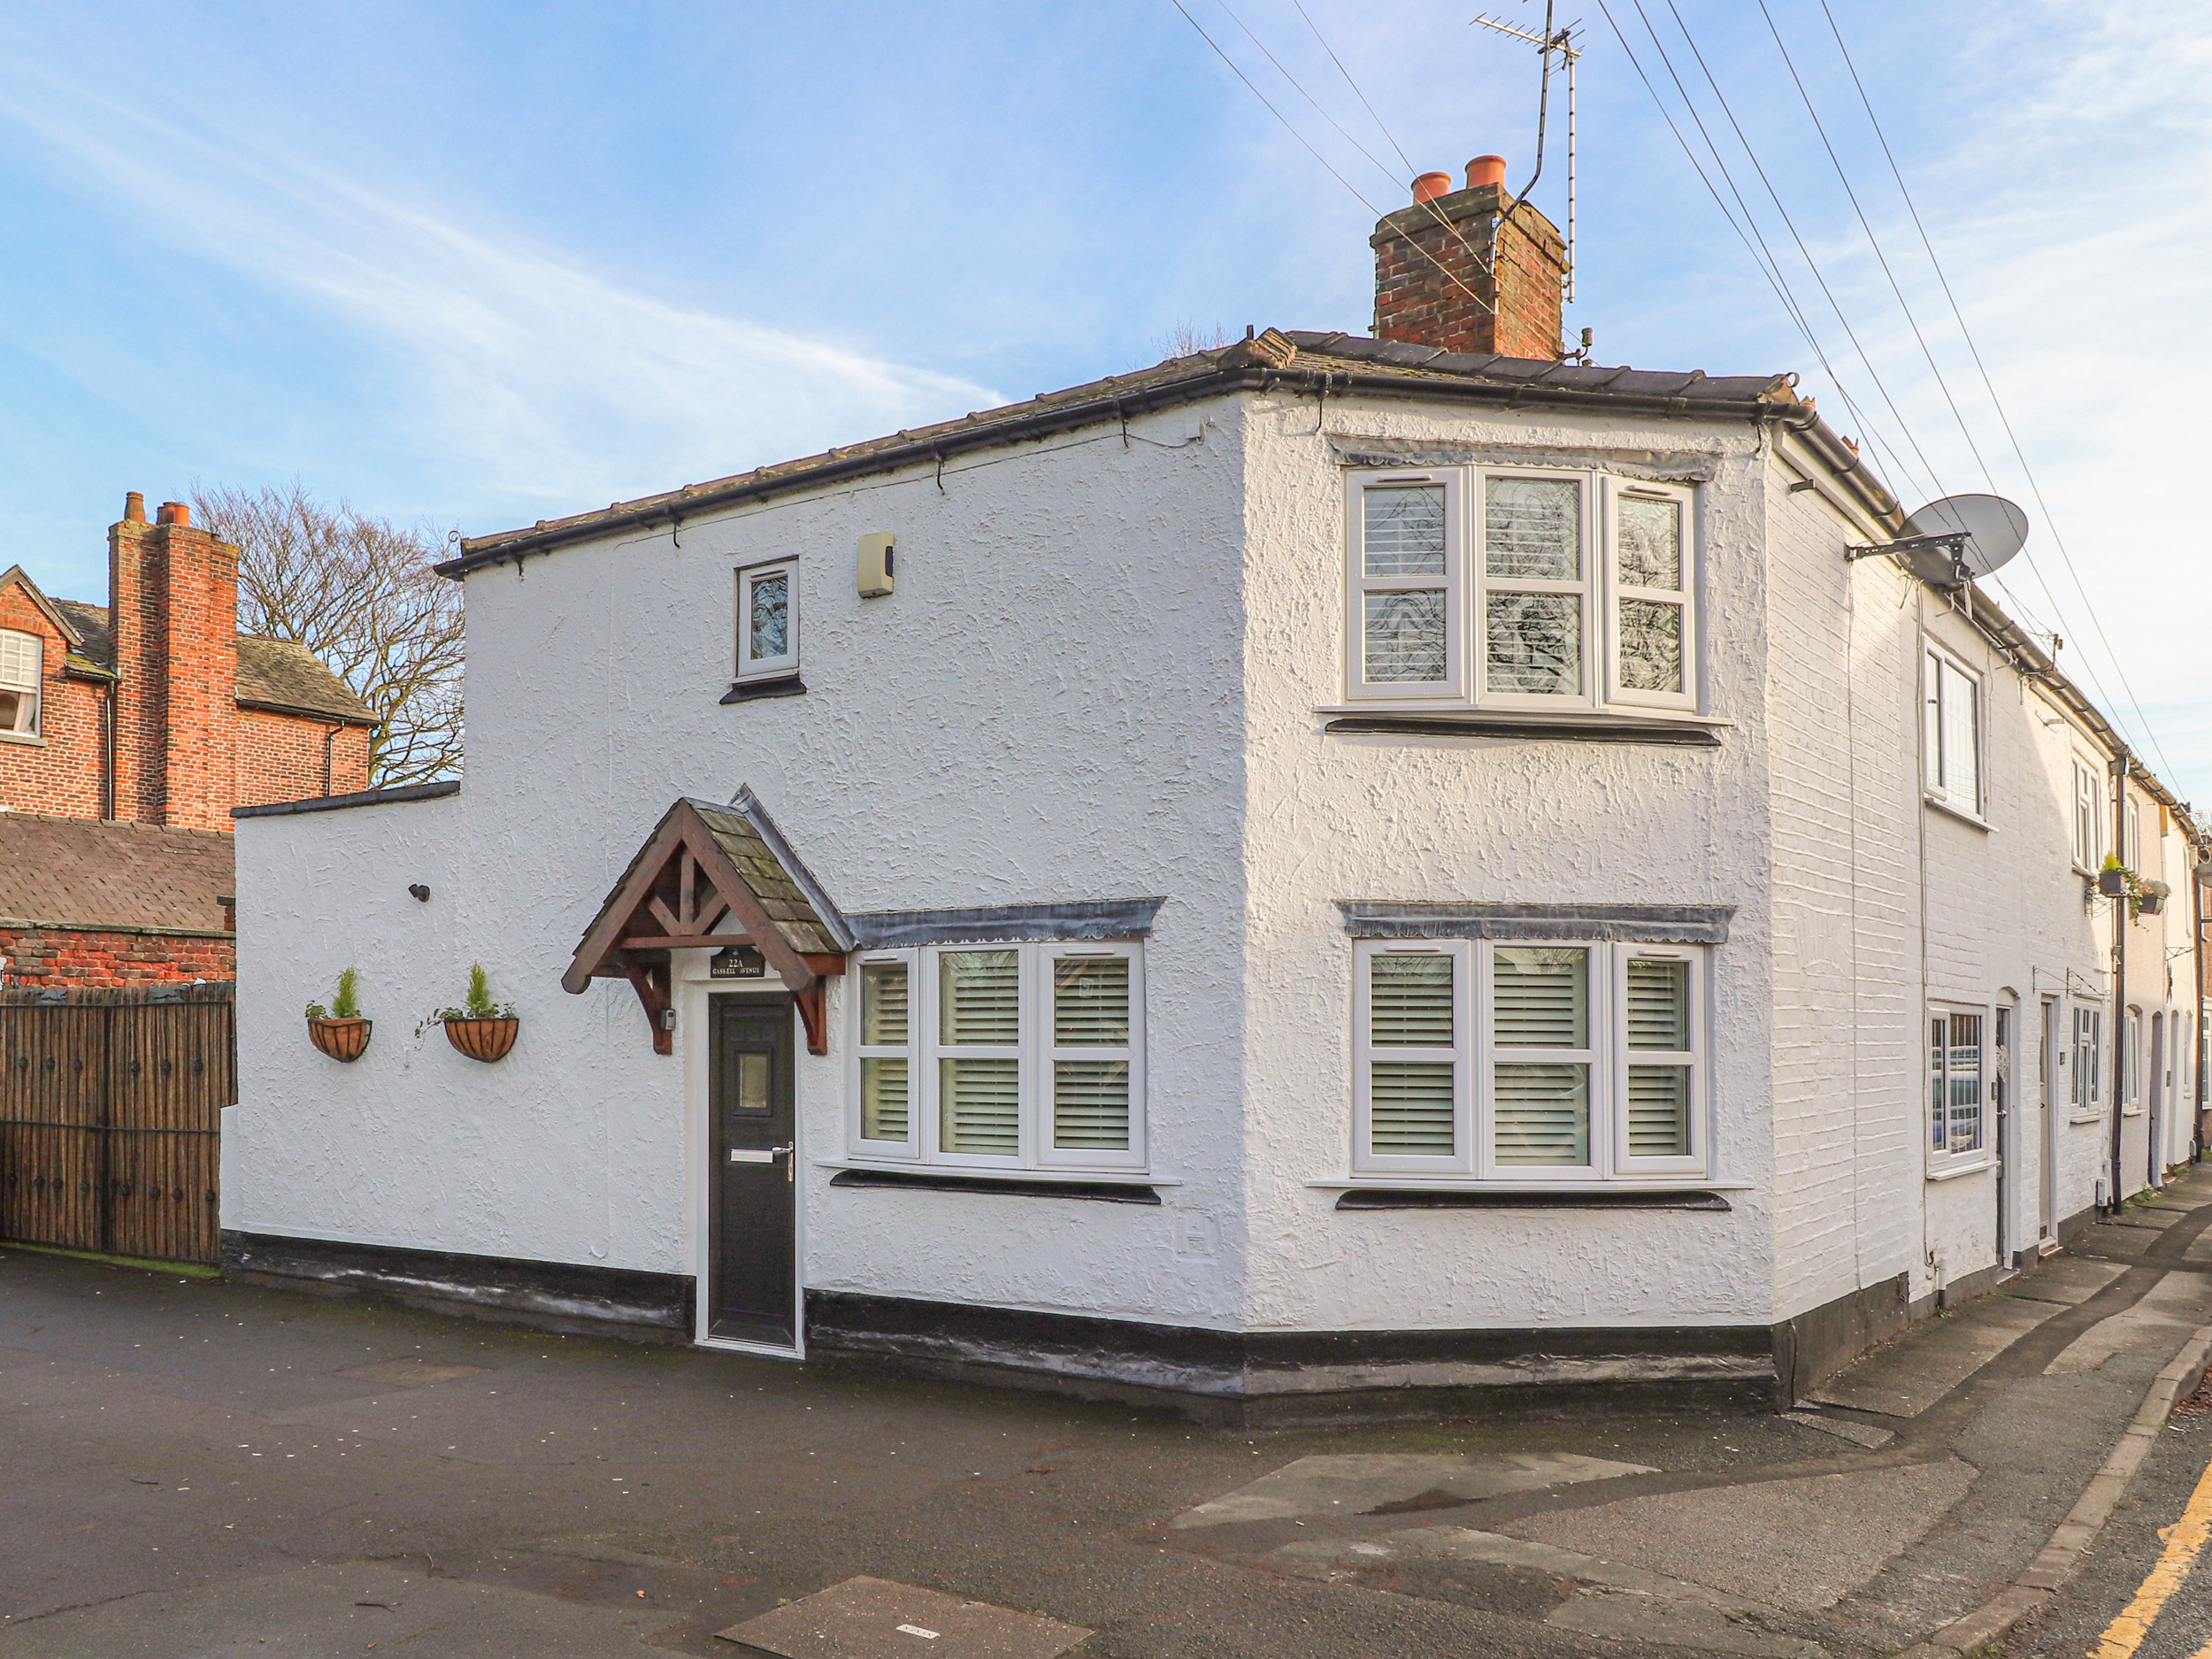 2 bedroom Cottage for rent in Knutsford